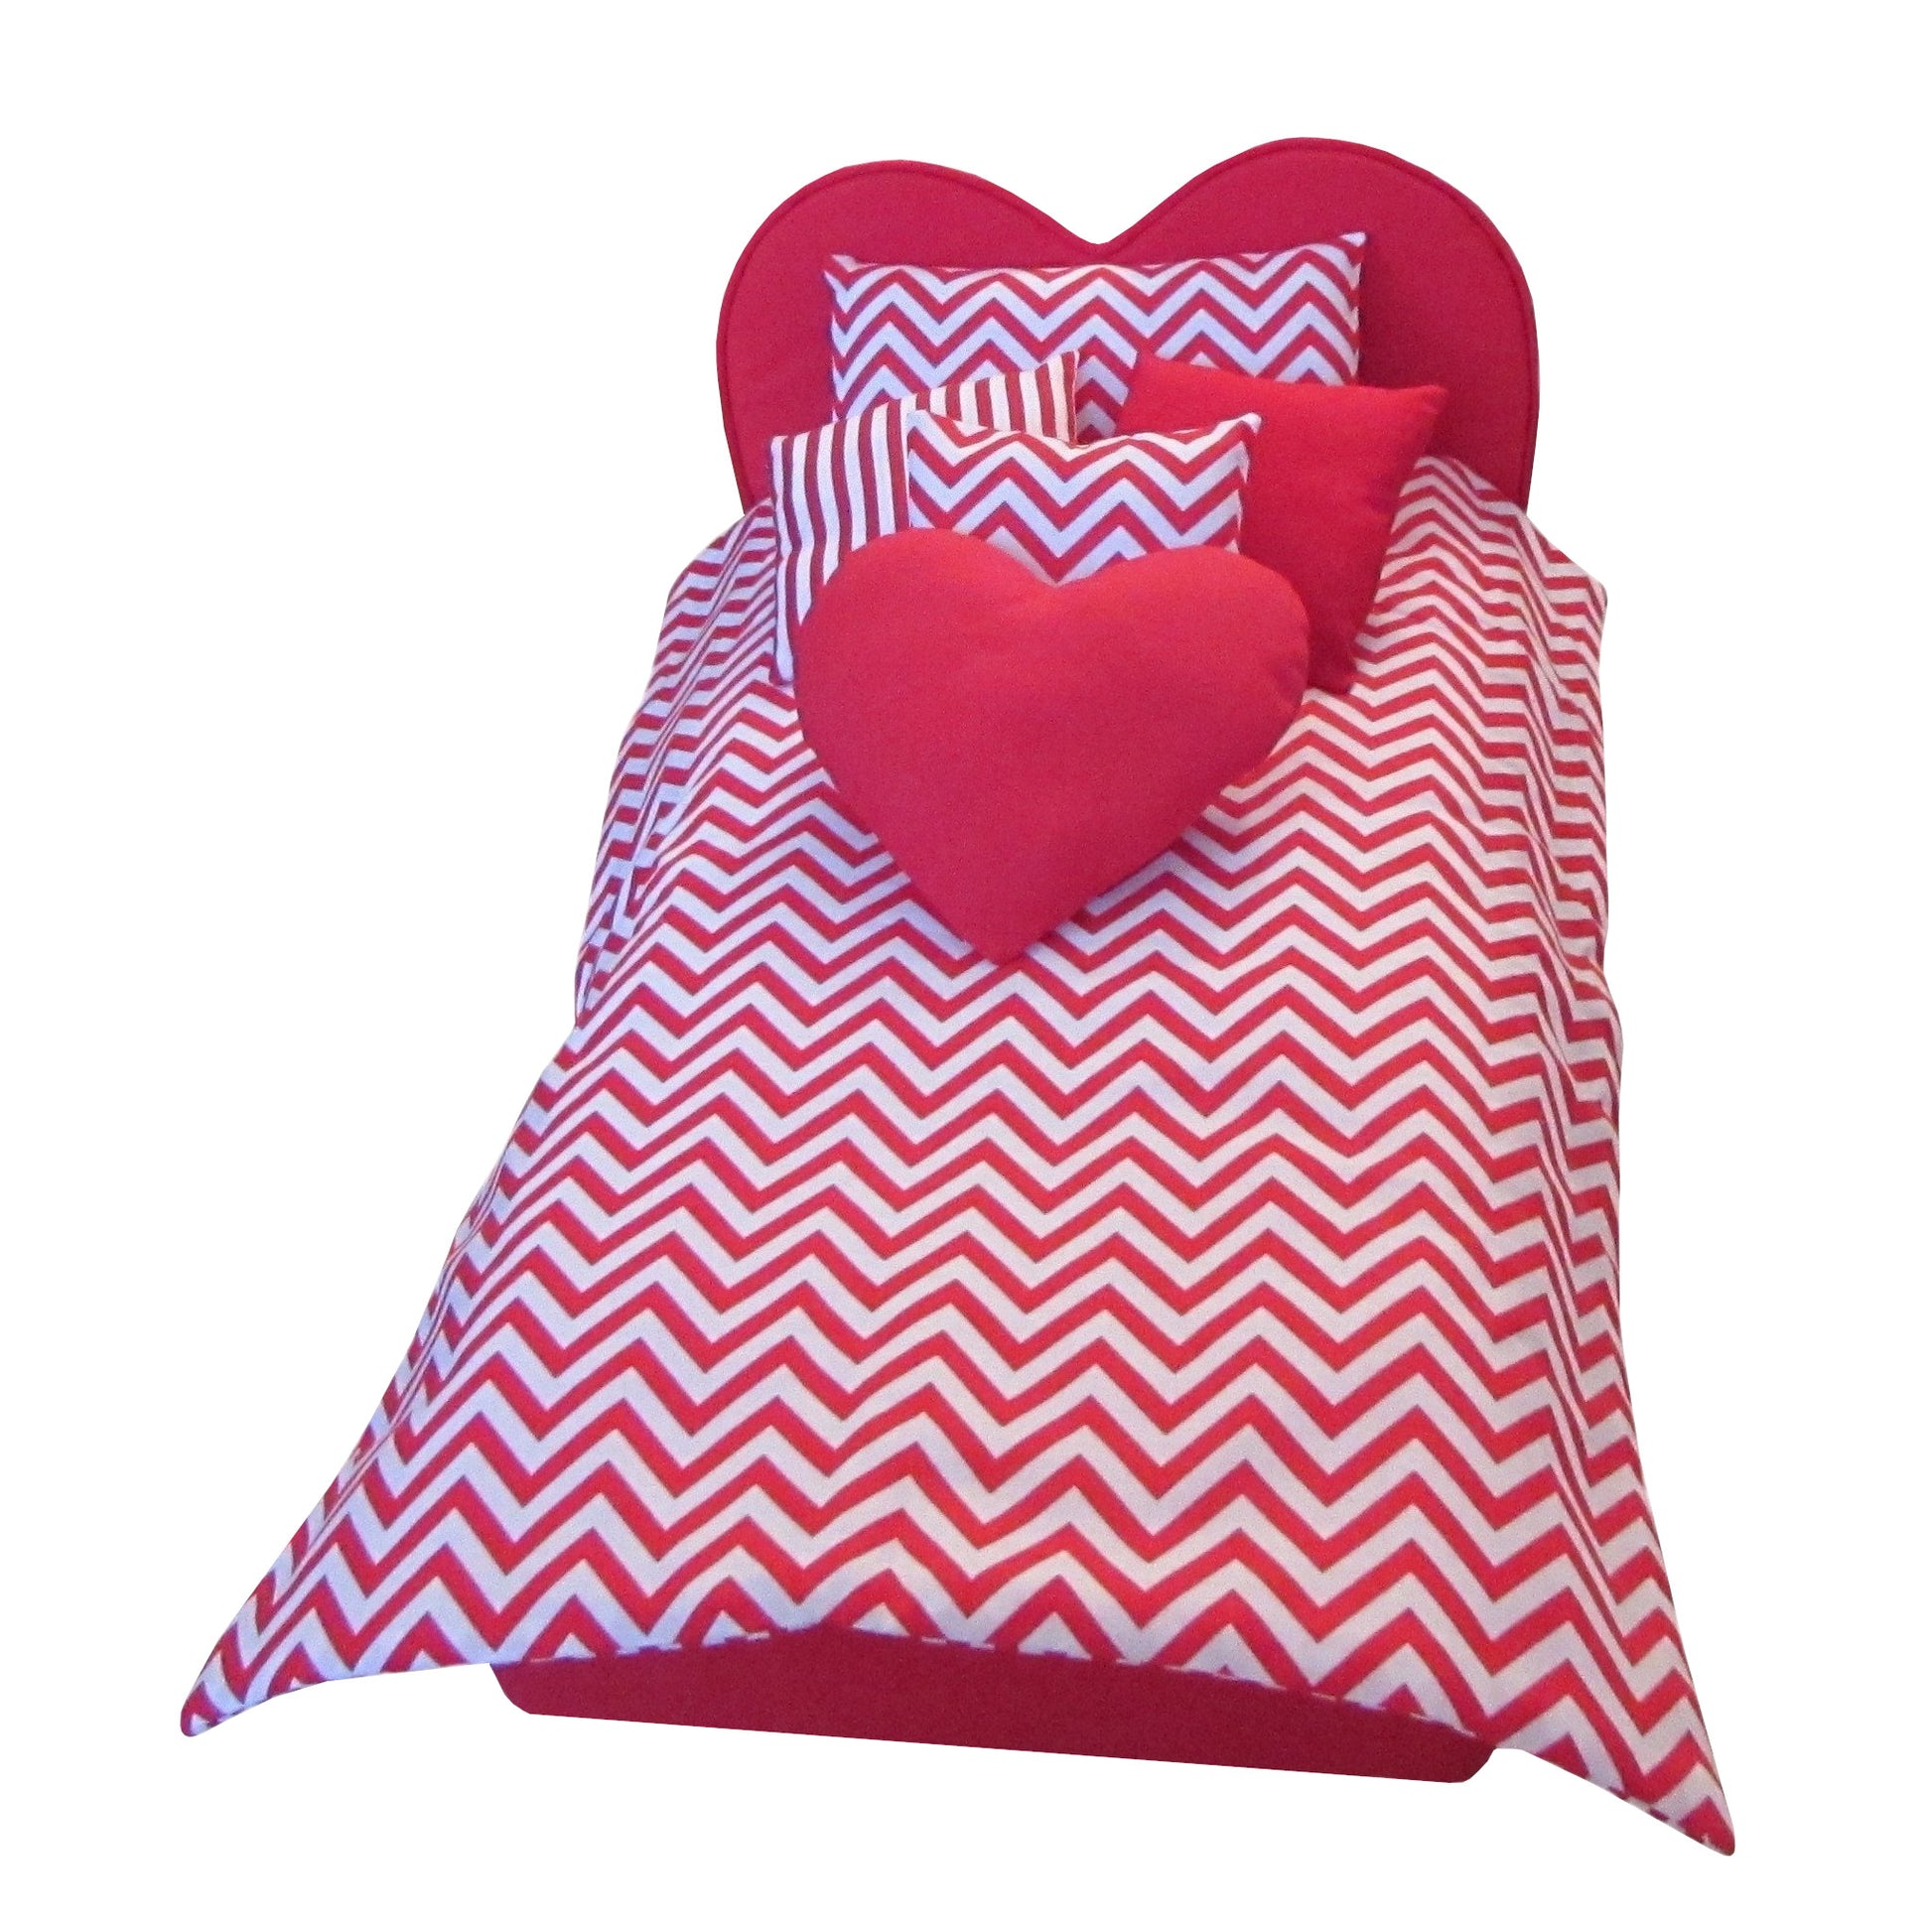 Red and White Chevron Doll Comforter Set and Red Heart Upholstered Doll Bed for 18-inch dolls Second view